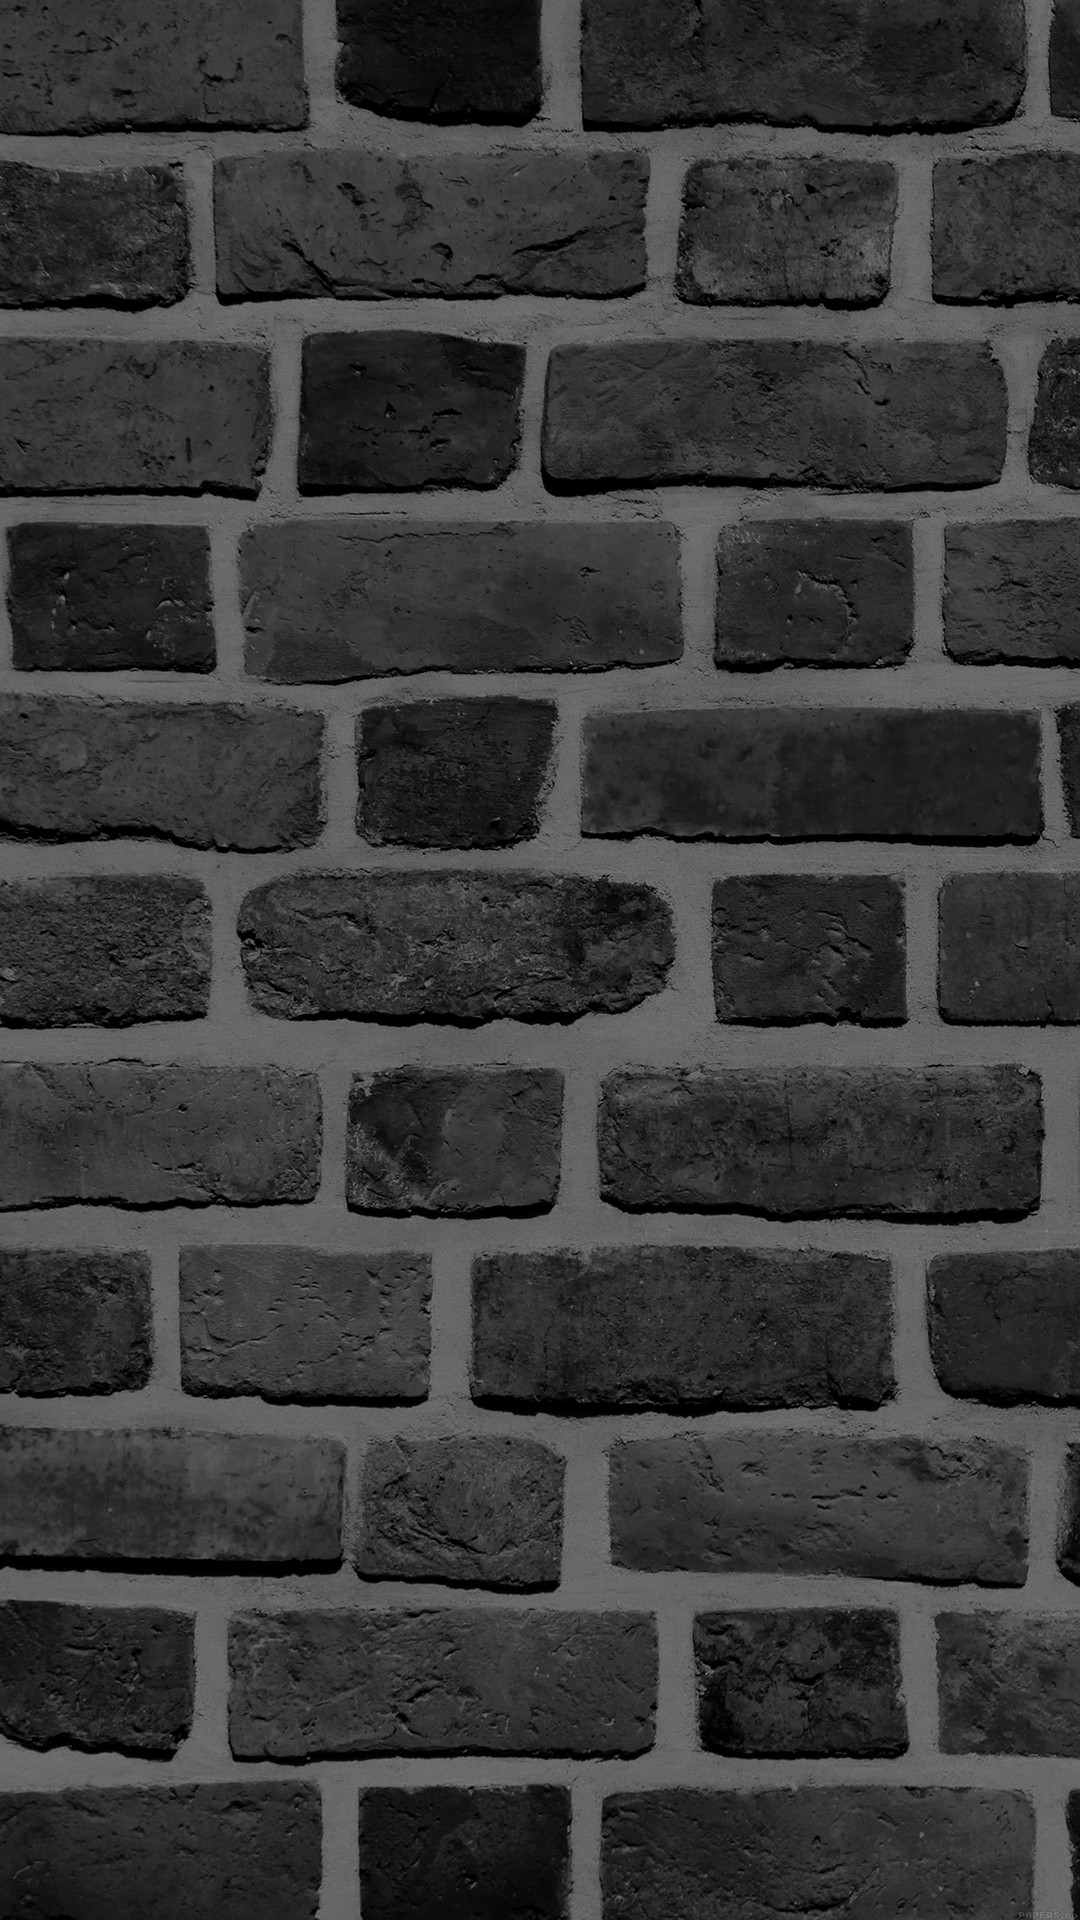 Brick iPhone Wallpaper HD with high-resolution 1080x1920 pixel. You can set as wallpaper for Apple iPhone X, XS Max, XR, 8, 7, 6, SE, iPad. Enjoy and share your favorite HD wallpapers and background images